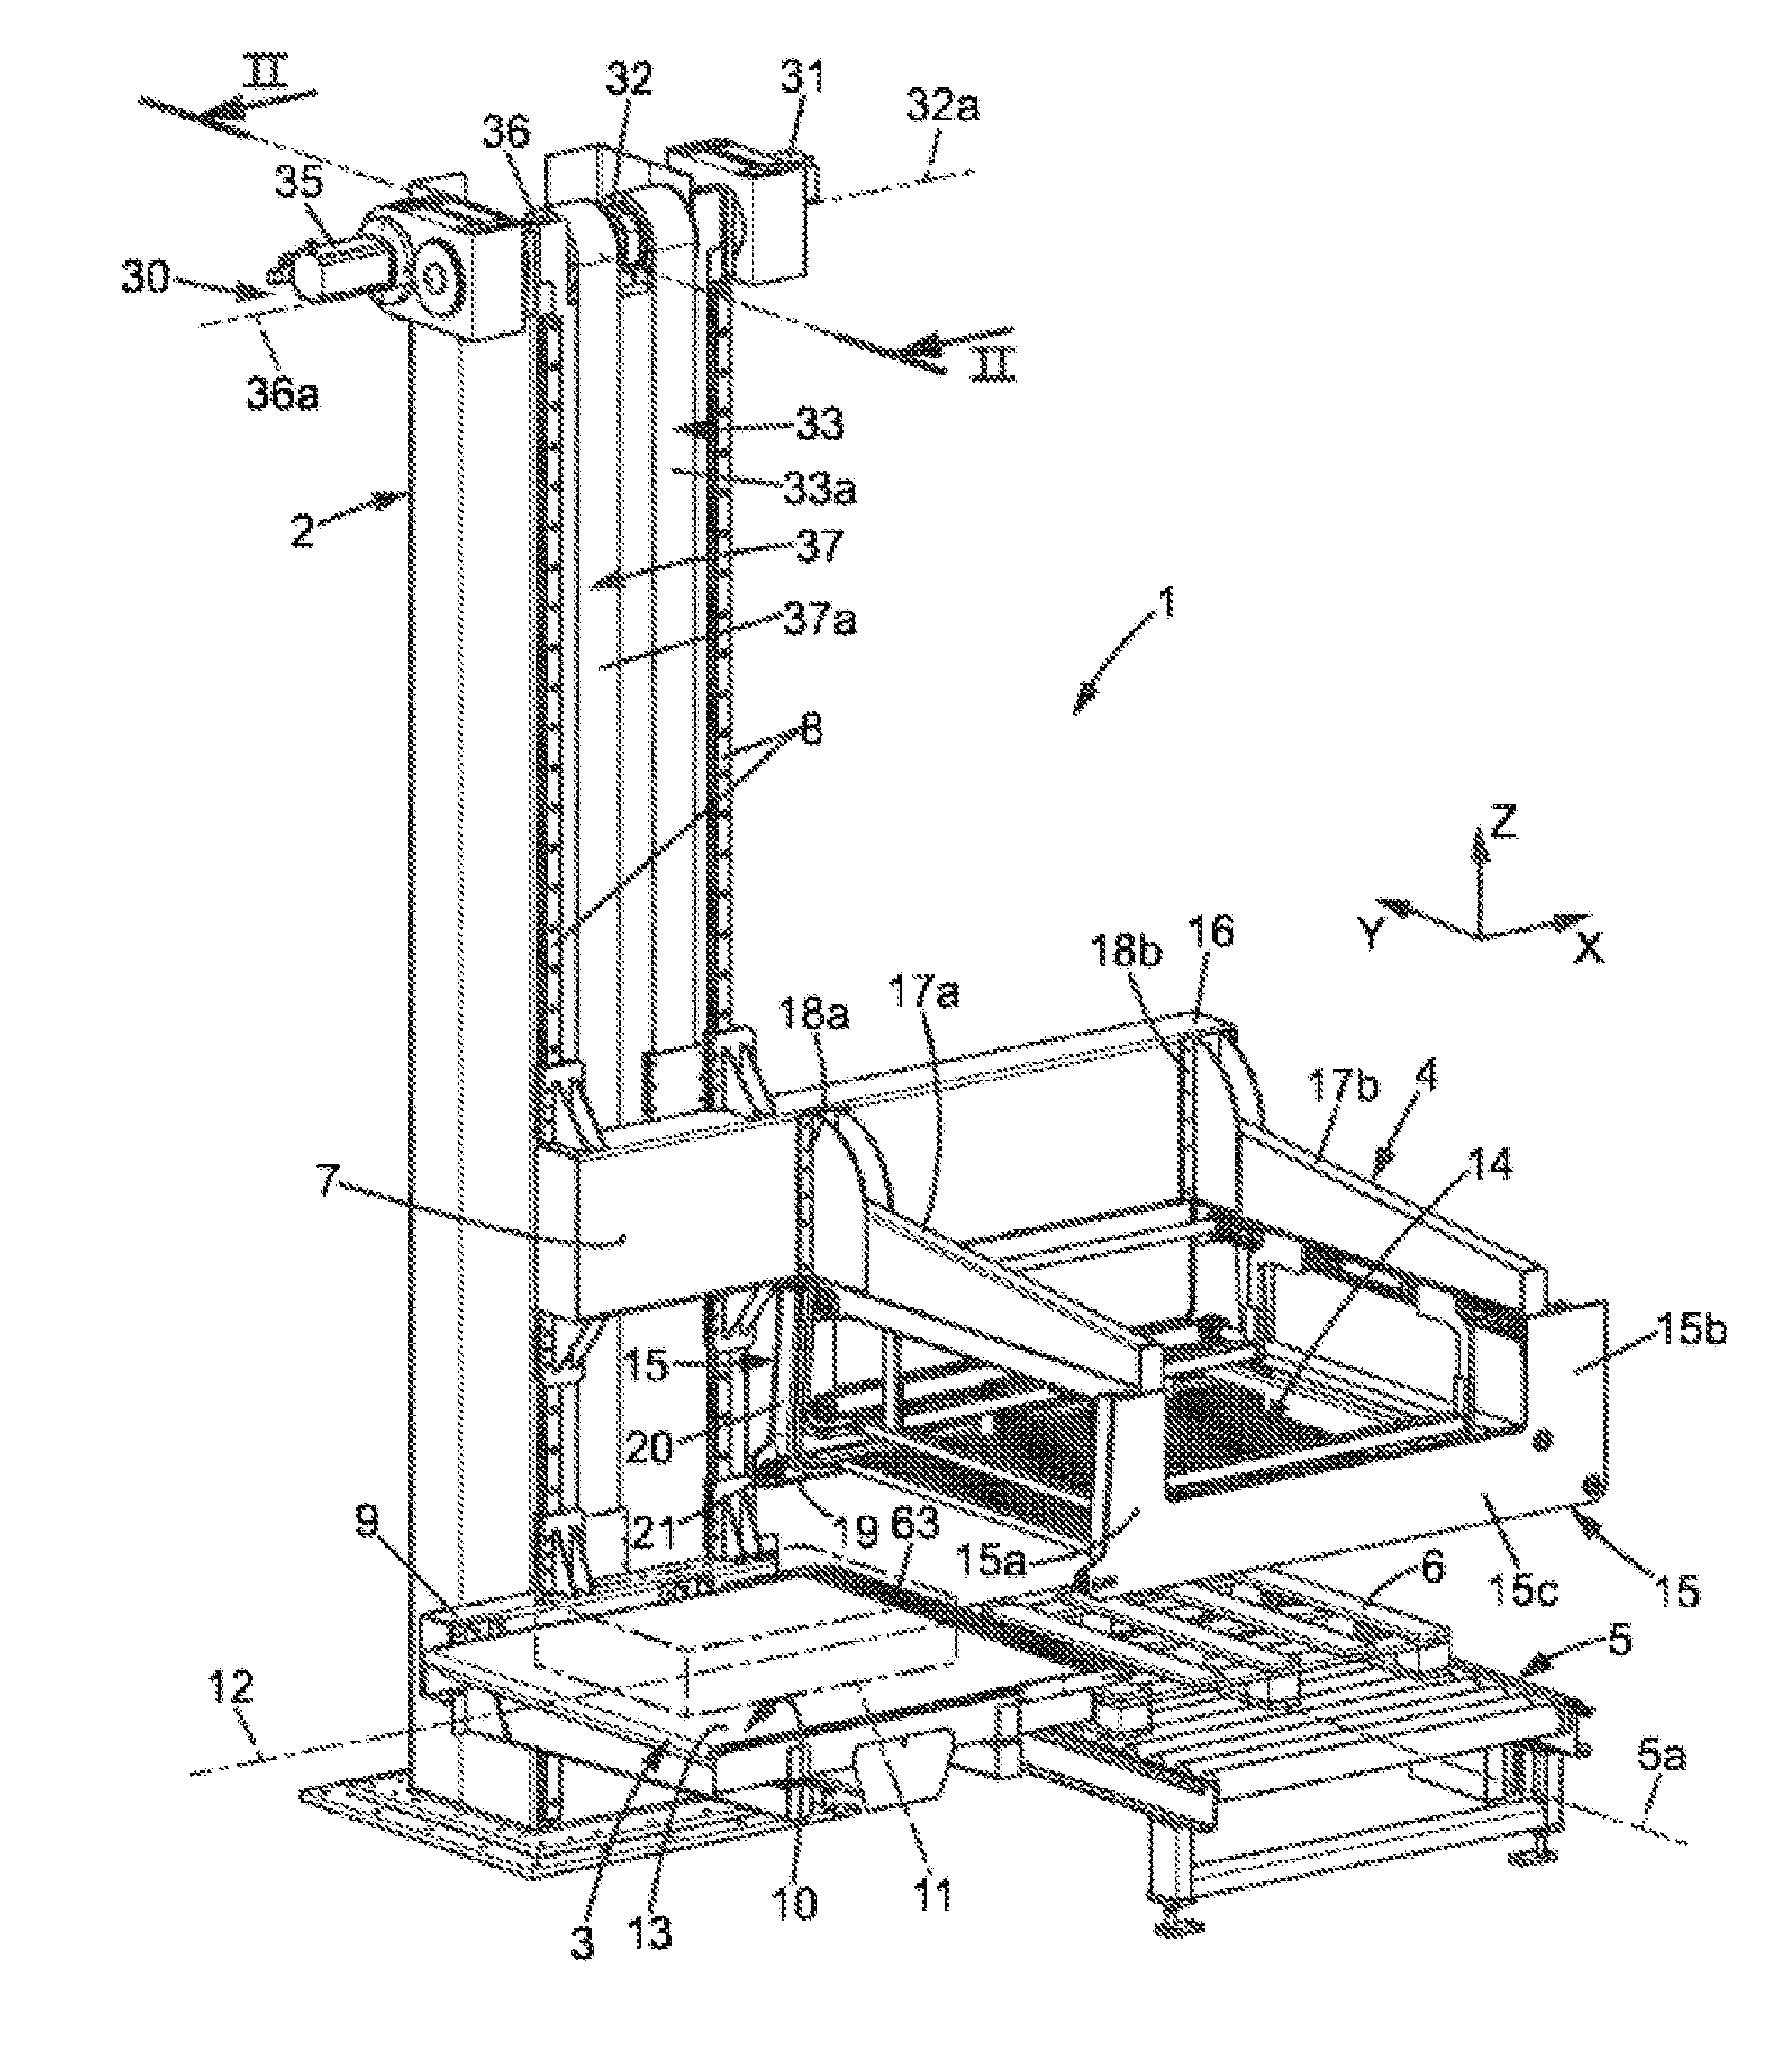 Device for transferring pre-formed layers of objects to the top of a pallet